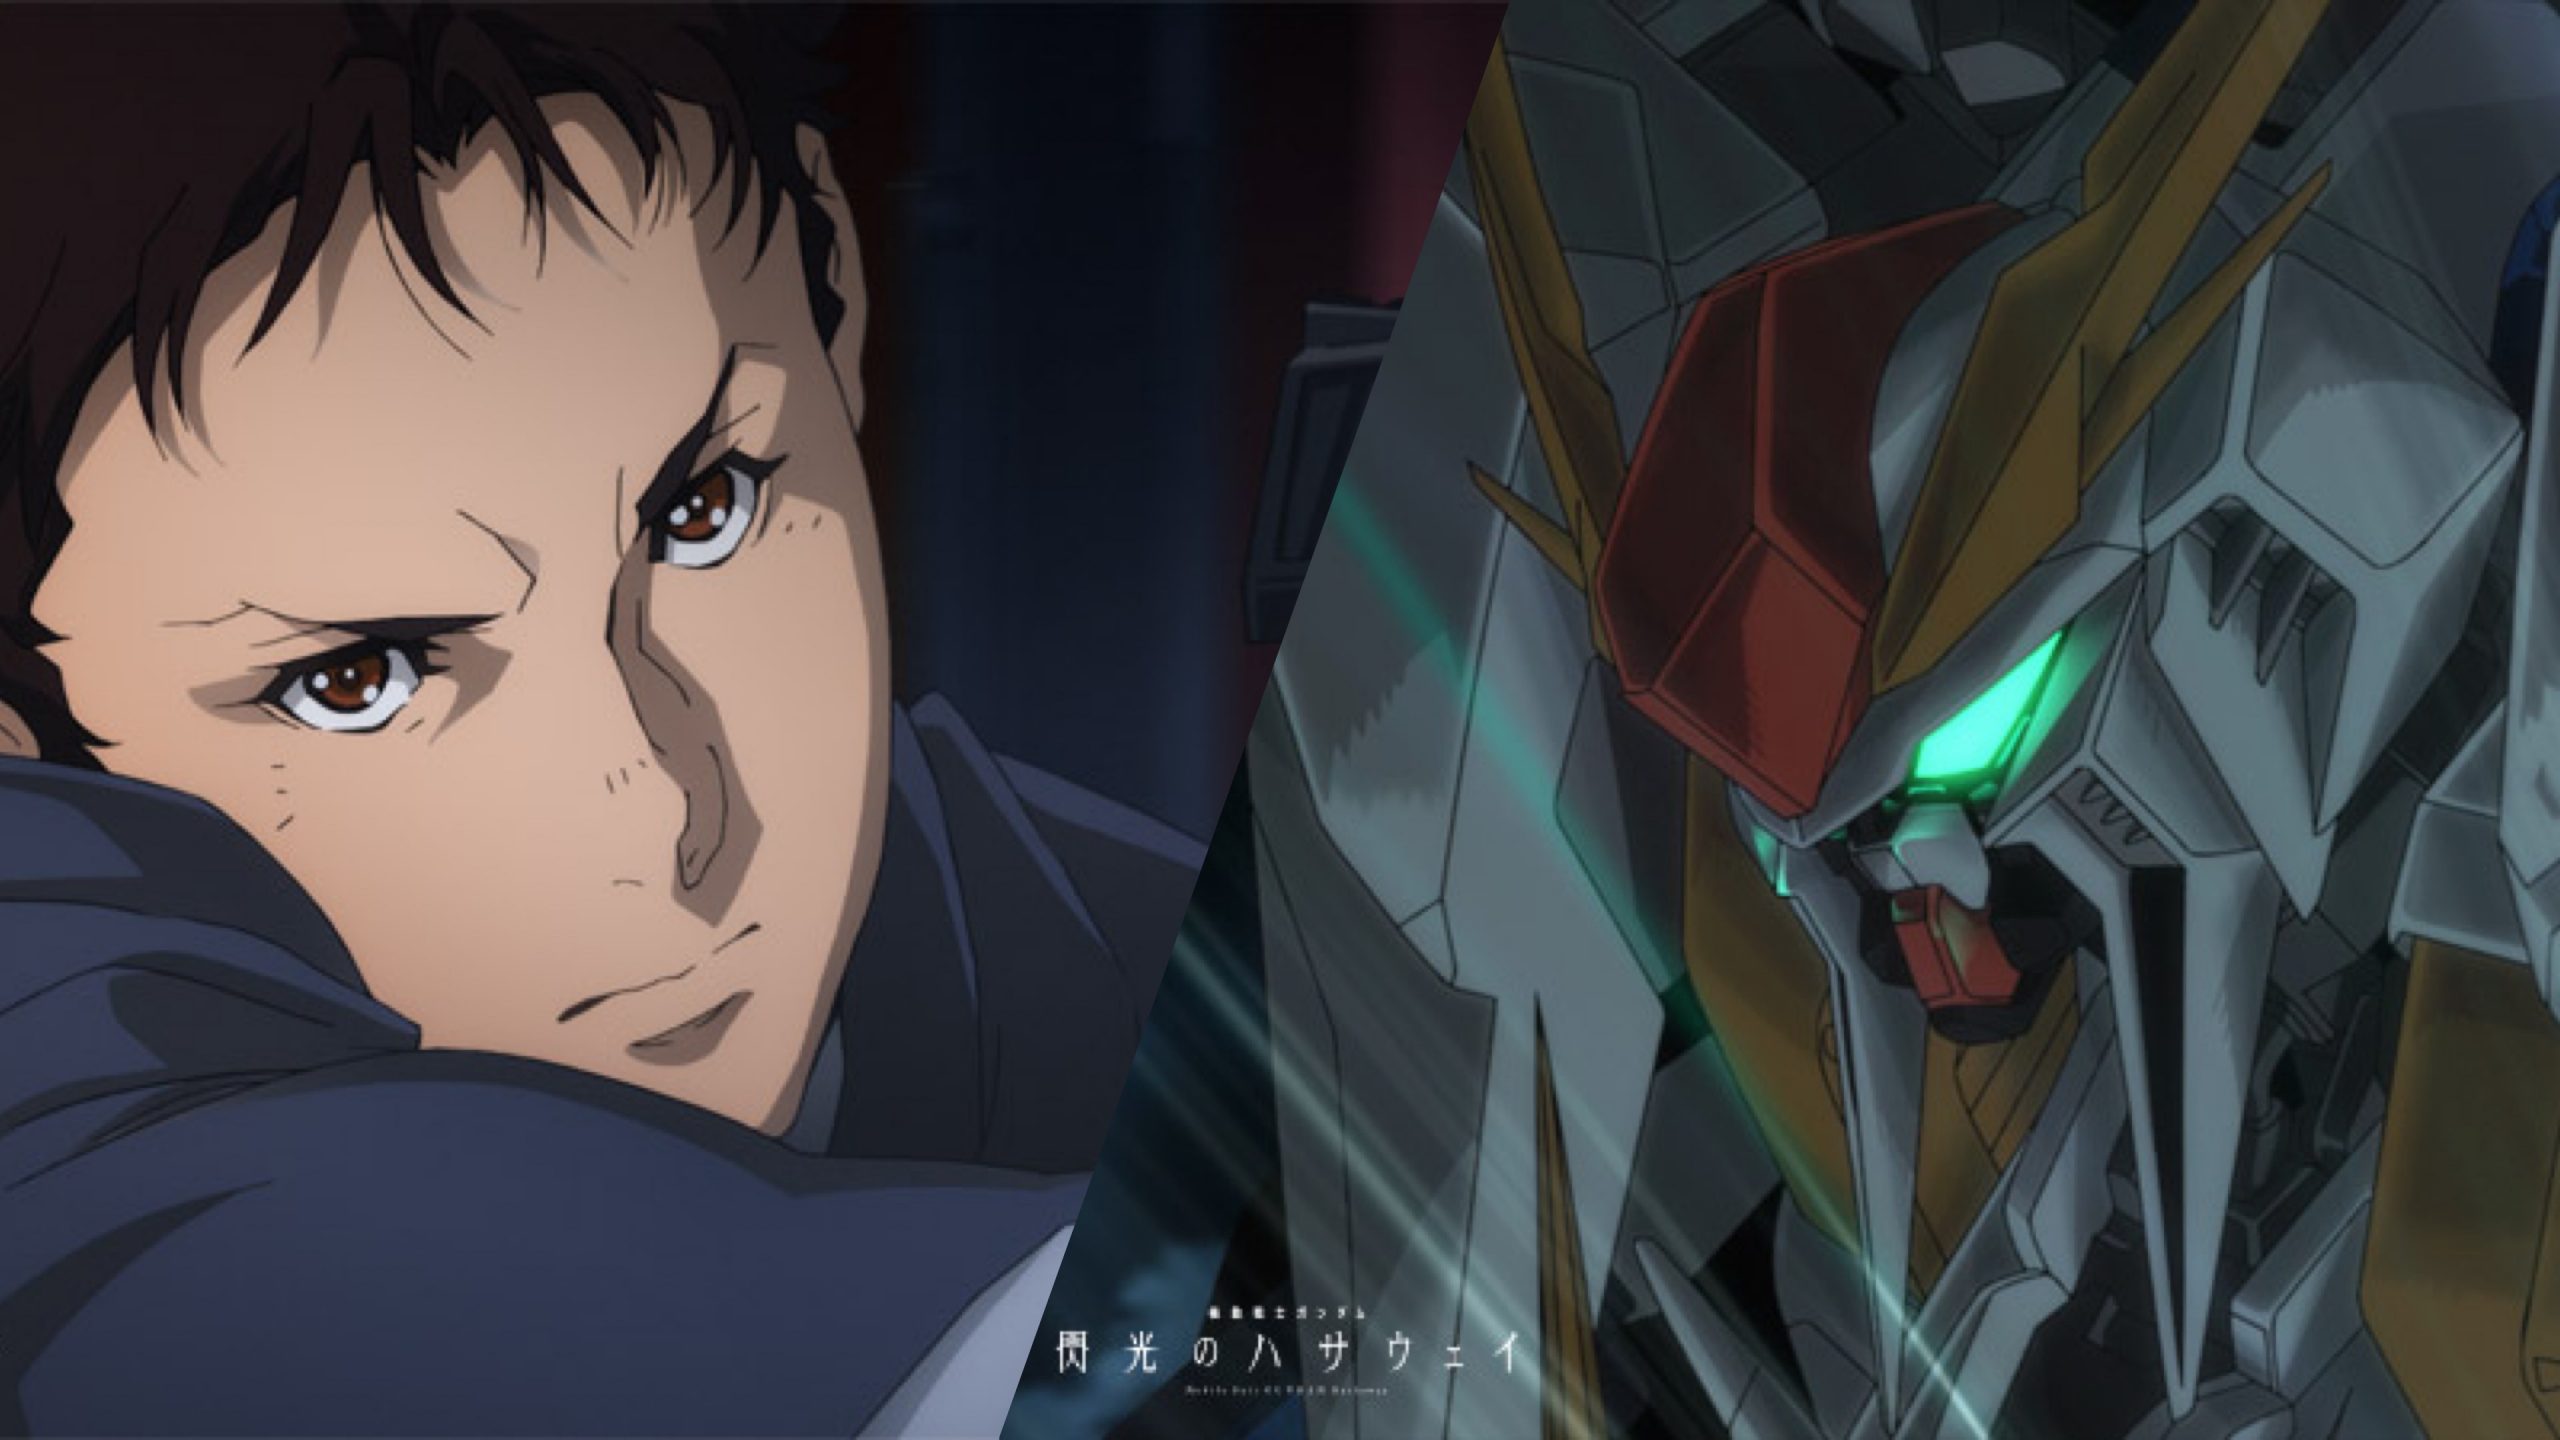 Mobile Suit Gundam Hathaway's Flash to set Record for Most Screenings in the Gundam Franchise